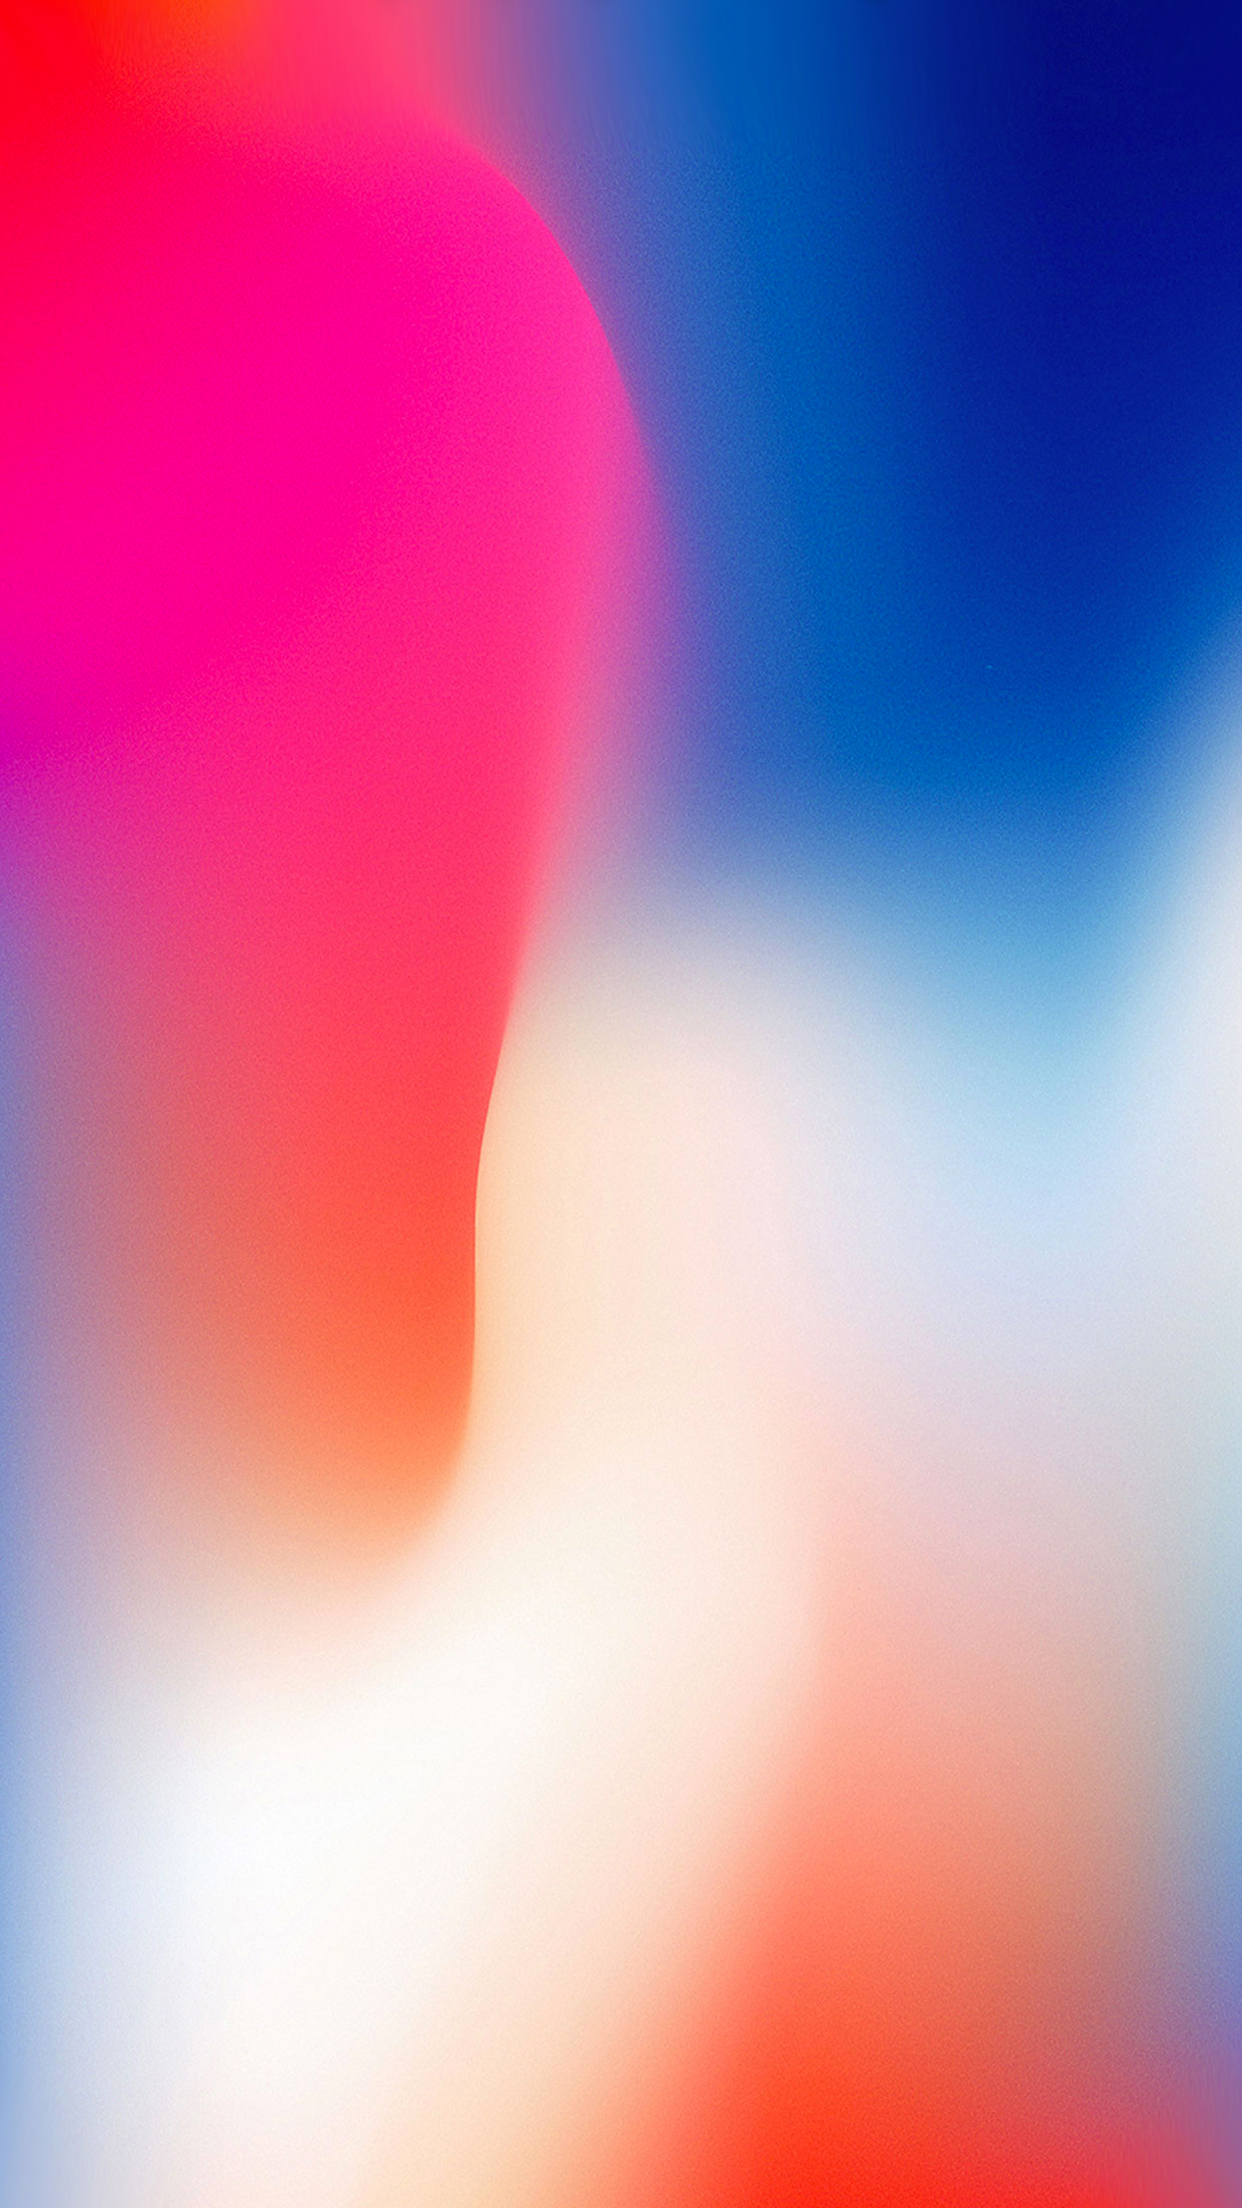 iPhone Wallpapers in High Quality: Original, Apple, Abstract, Nature,  Space, and More